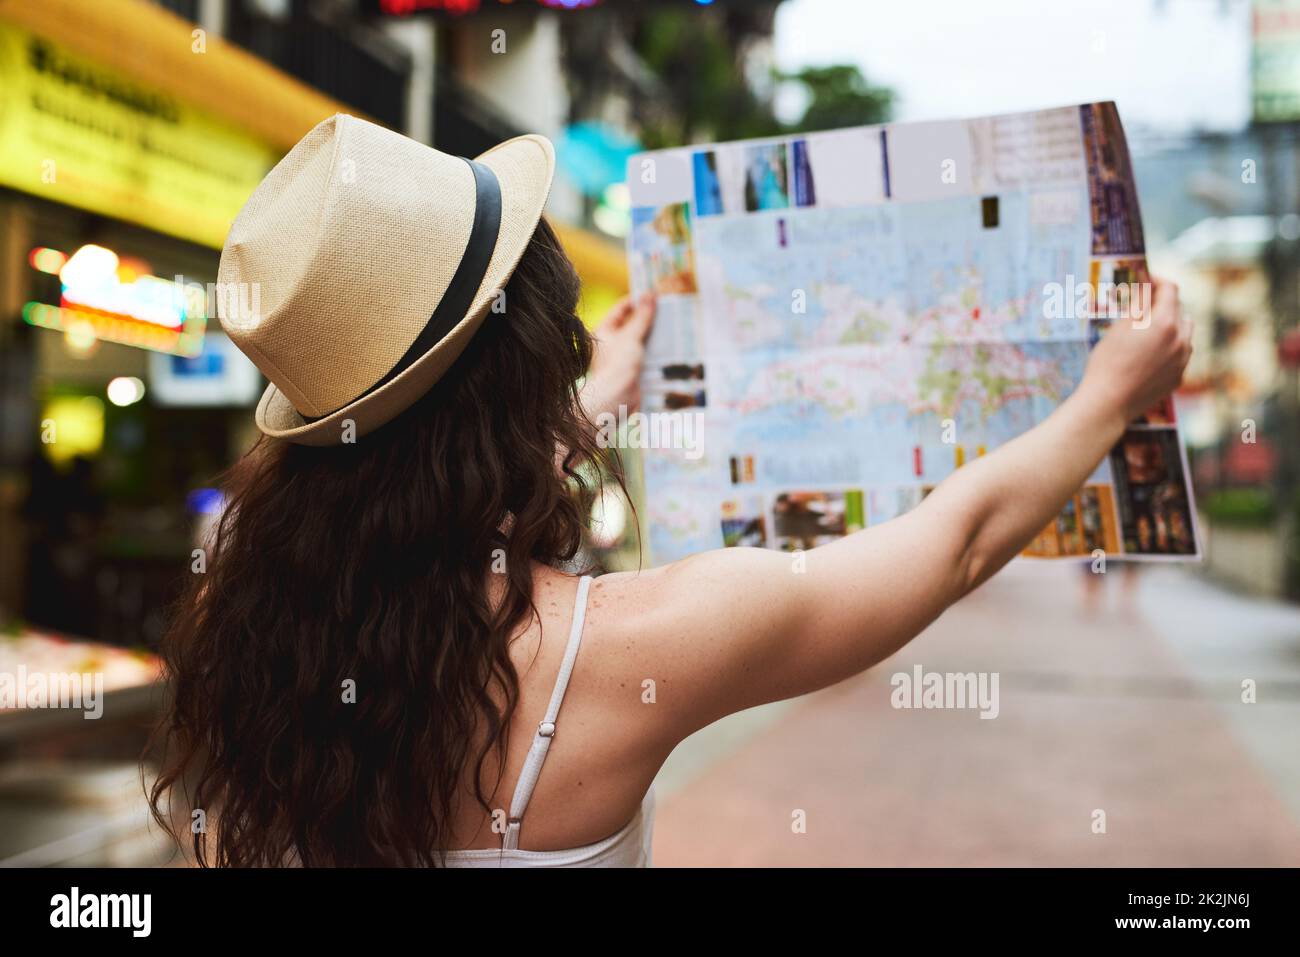 On a mission to see as many attractions as possible. Cropped shot of a young woman using a map while travelling in a foreign city. Stock Photo